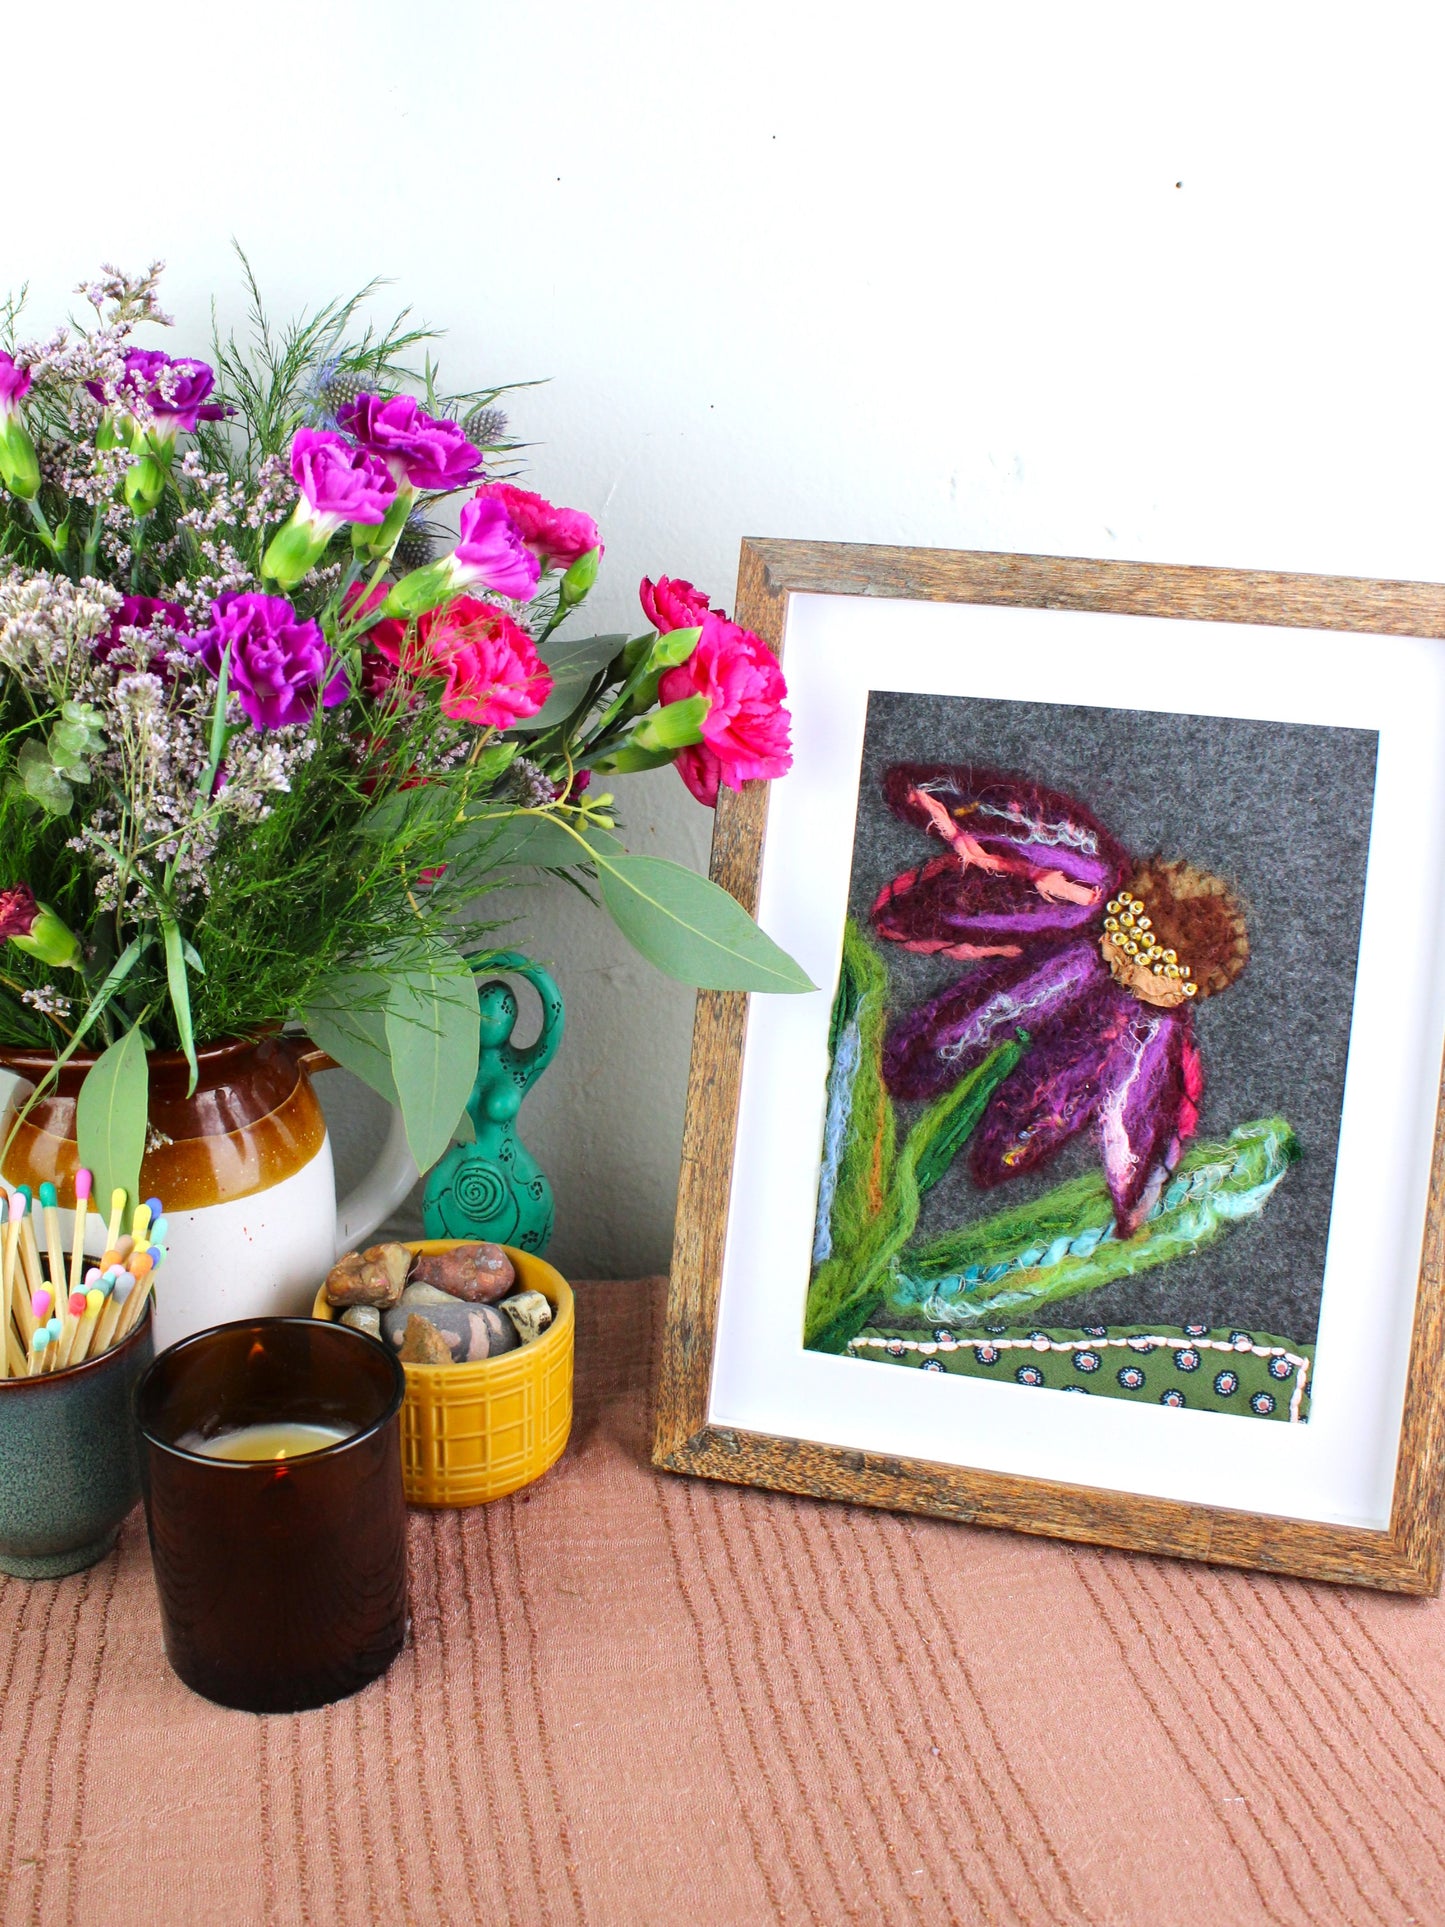 Echinacea Coneflower Textile Collage | Original One-of-a-Kind